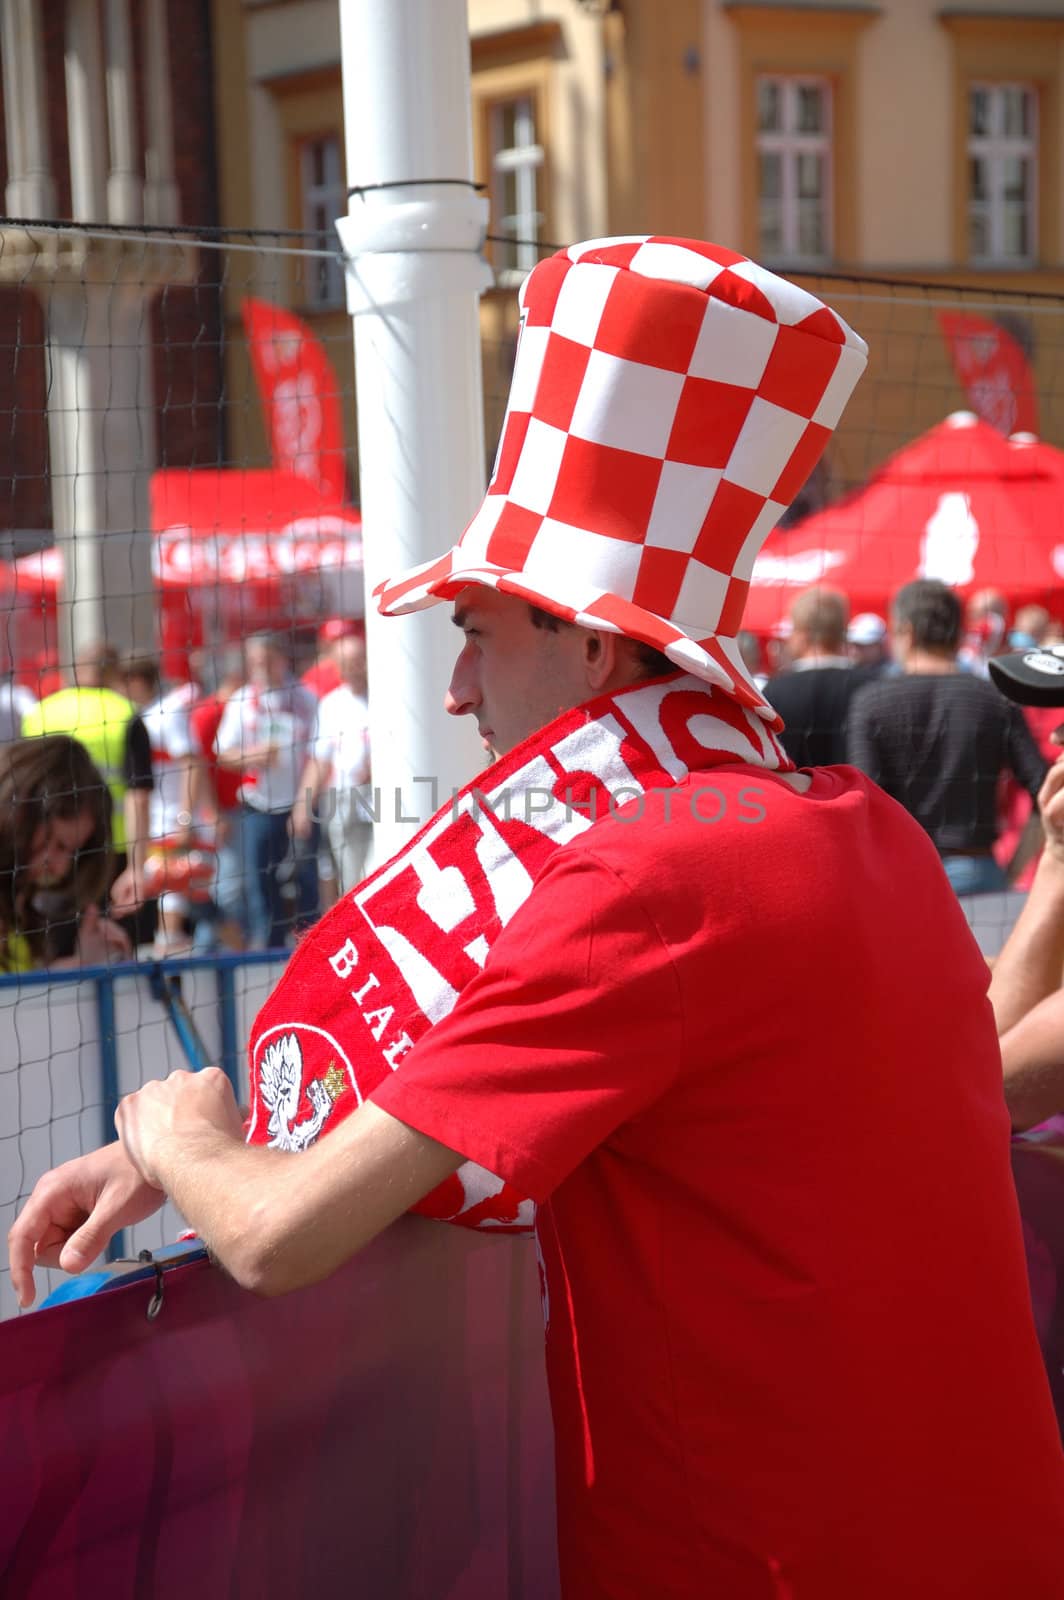 WROCLAW, POLAND - JUNE 8: UEFA Euro 2012, fanzone in Wroclaw. Single Polish fan waiting for first game with Greece on June 8, 2012.